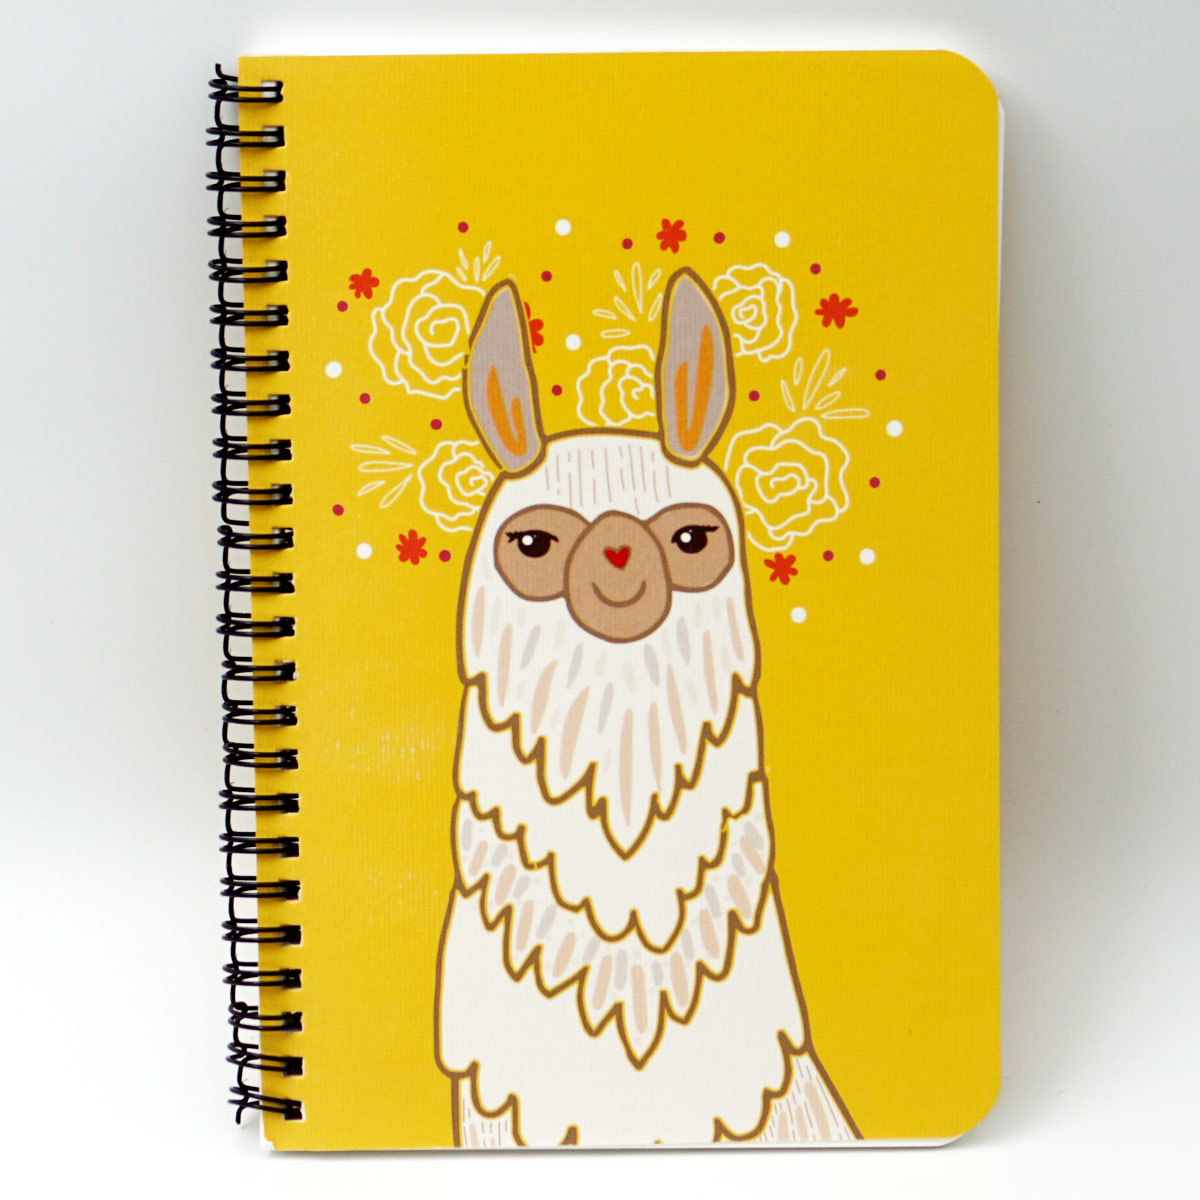 Factor A5 Yellow Colour With Owl Design Wiro Soft Bound Unruled Spiral Notebook 100 GSM With 144 Pages SKU 50245